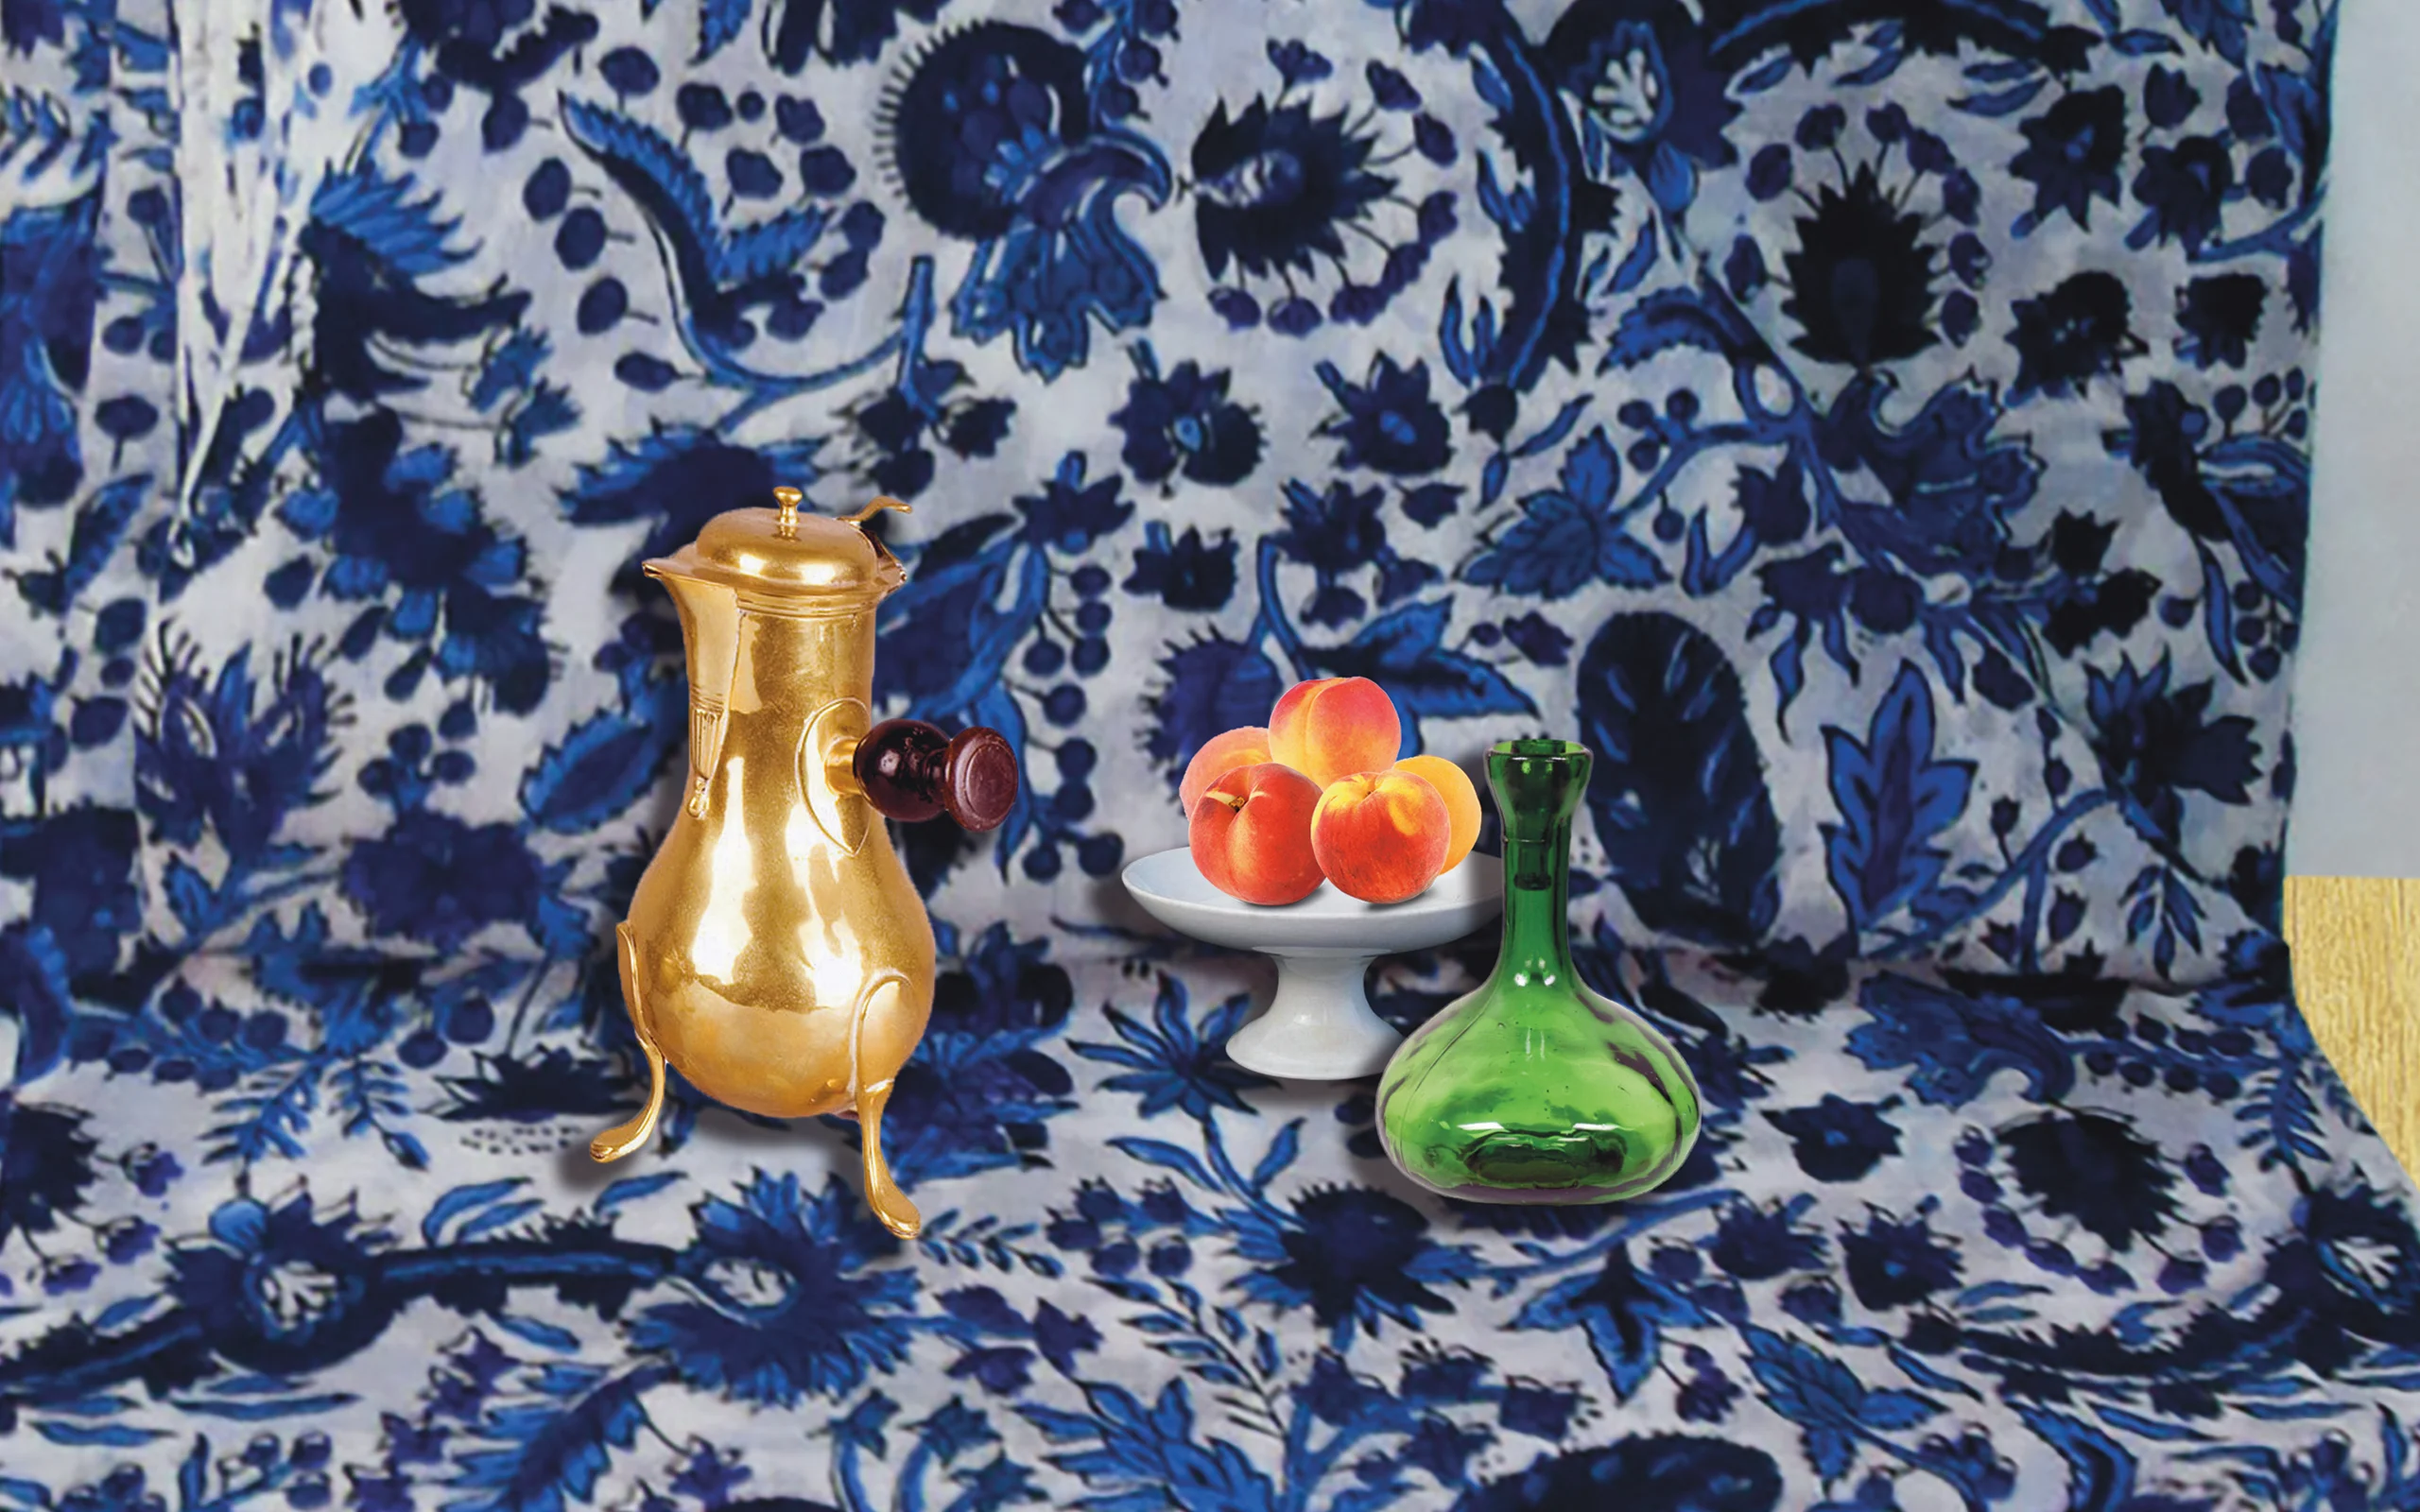 Matisse’s Still Life with Blue Tablecloth by Thomas Harpin.